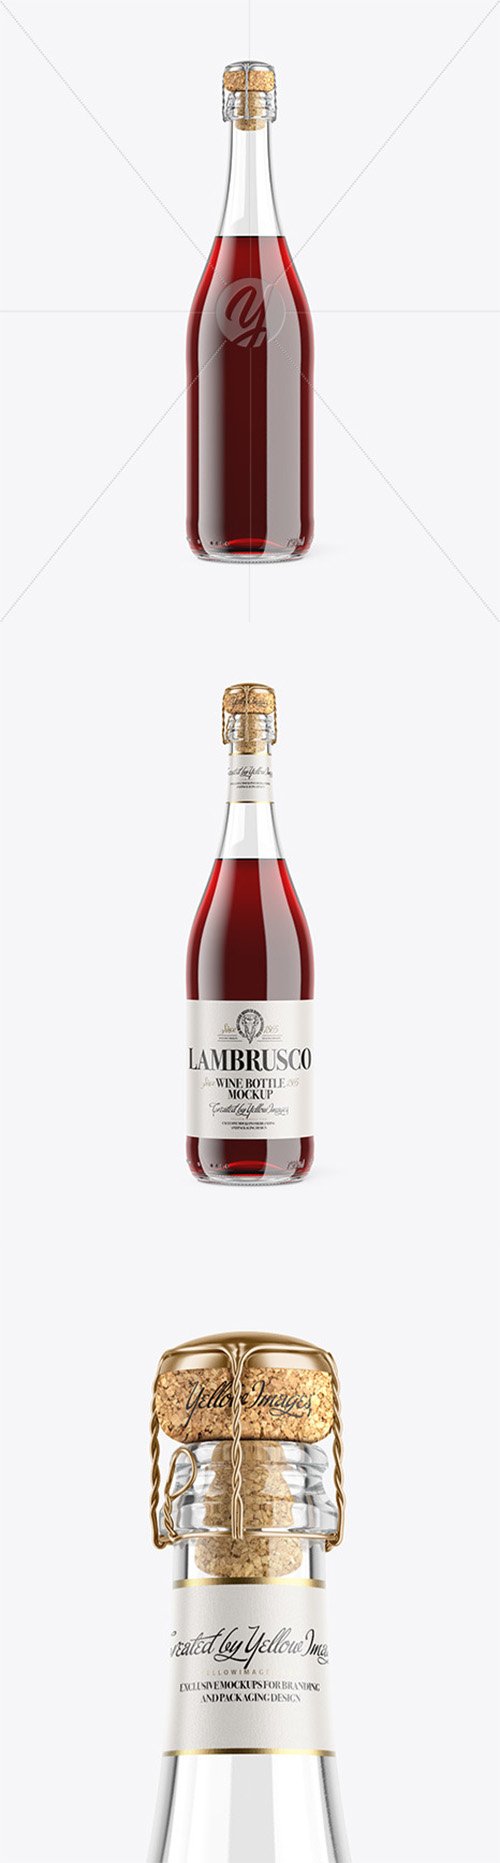 Clear Glass Lambrusco Bottle With Red Wine Mockup 62230 TIF